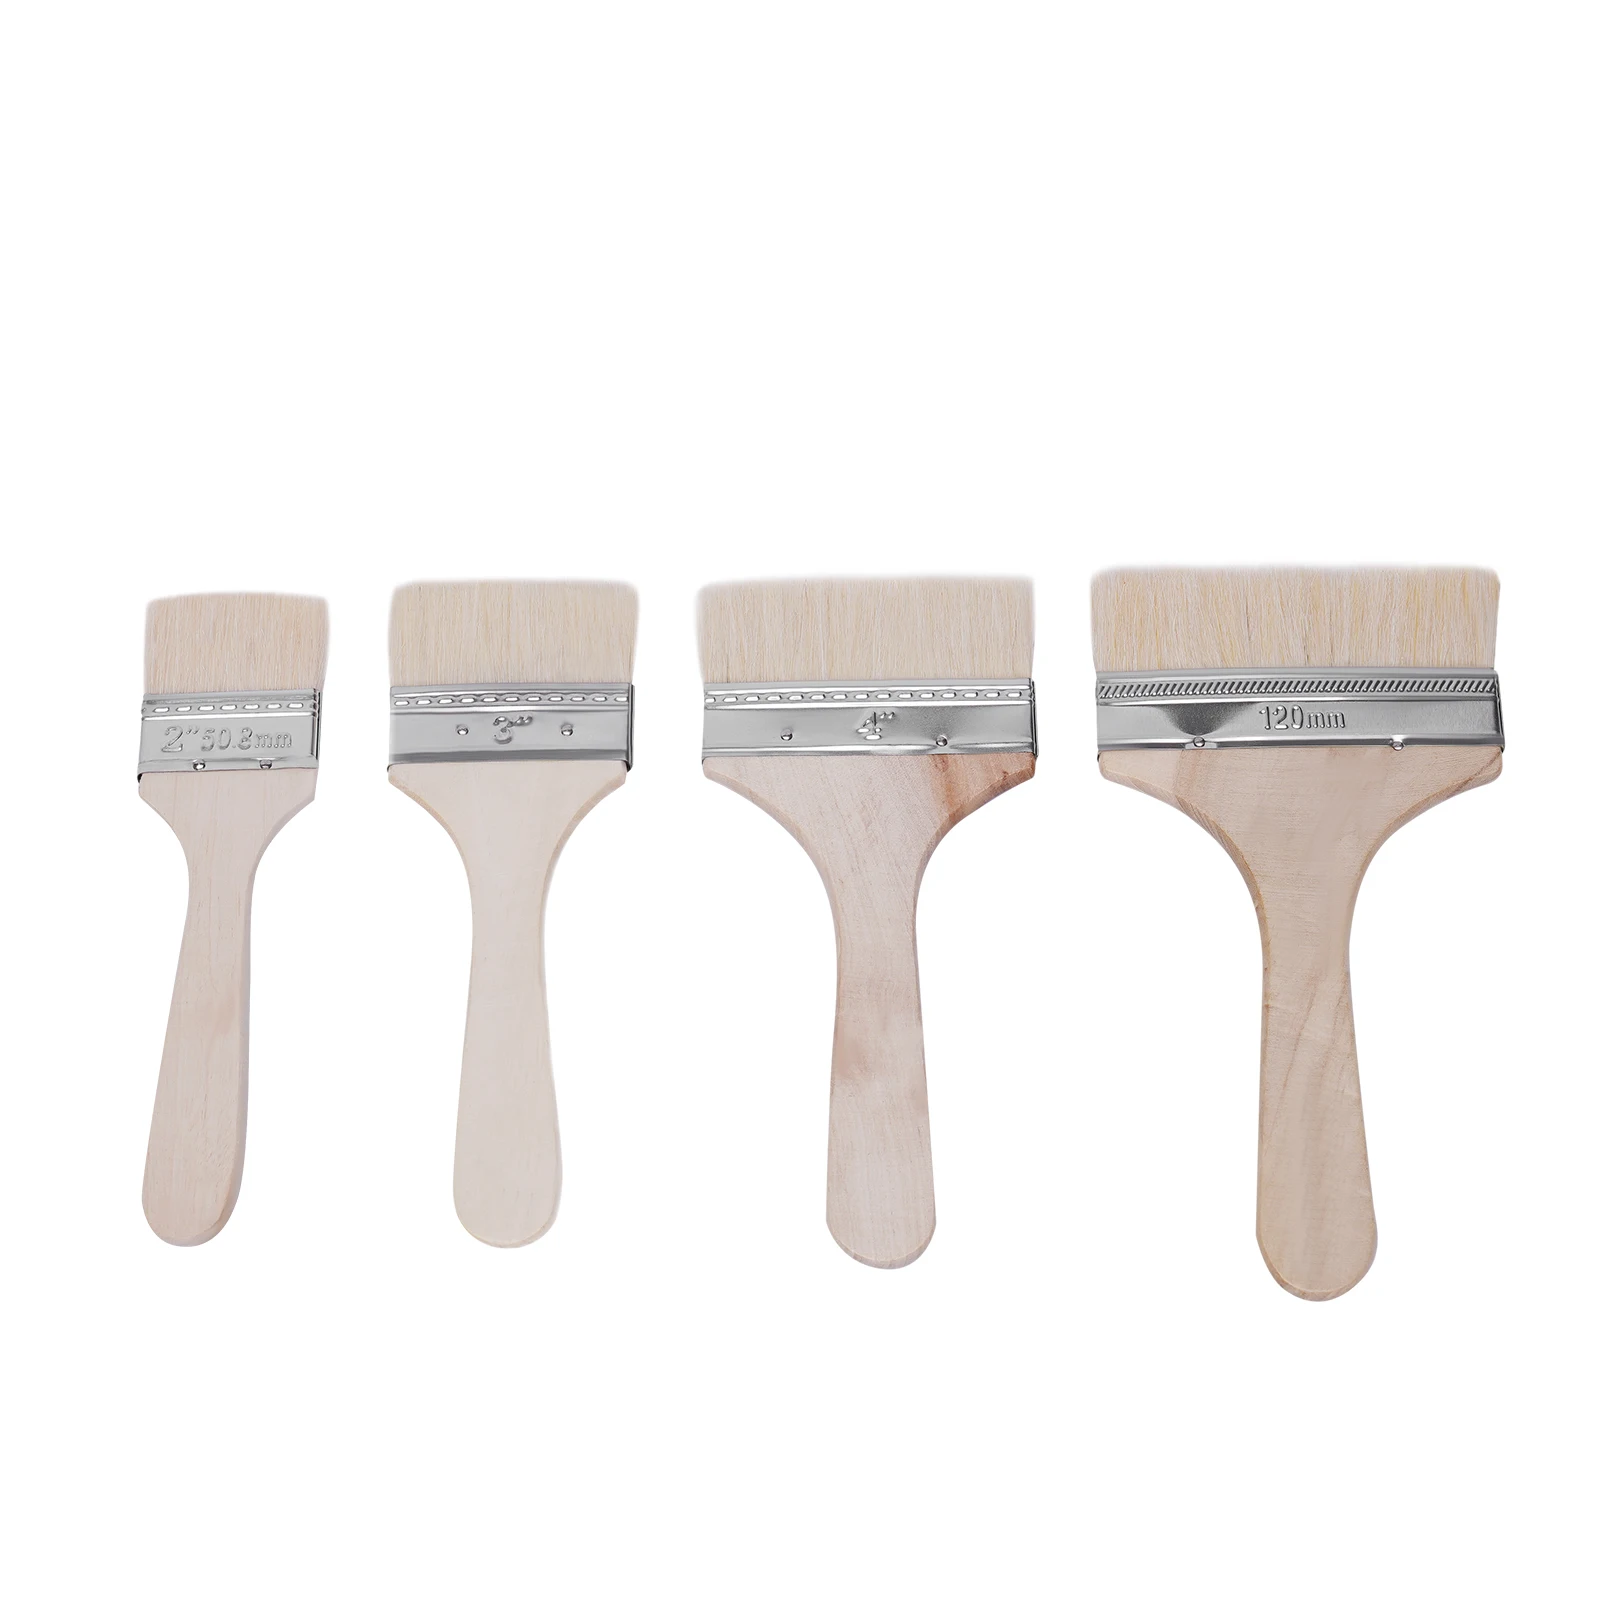 Pro Grade Paint Brushes, Variety Angle Paint Brushes, 4 Pack